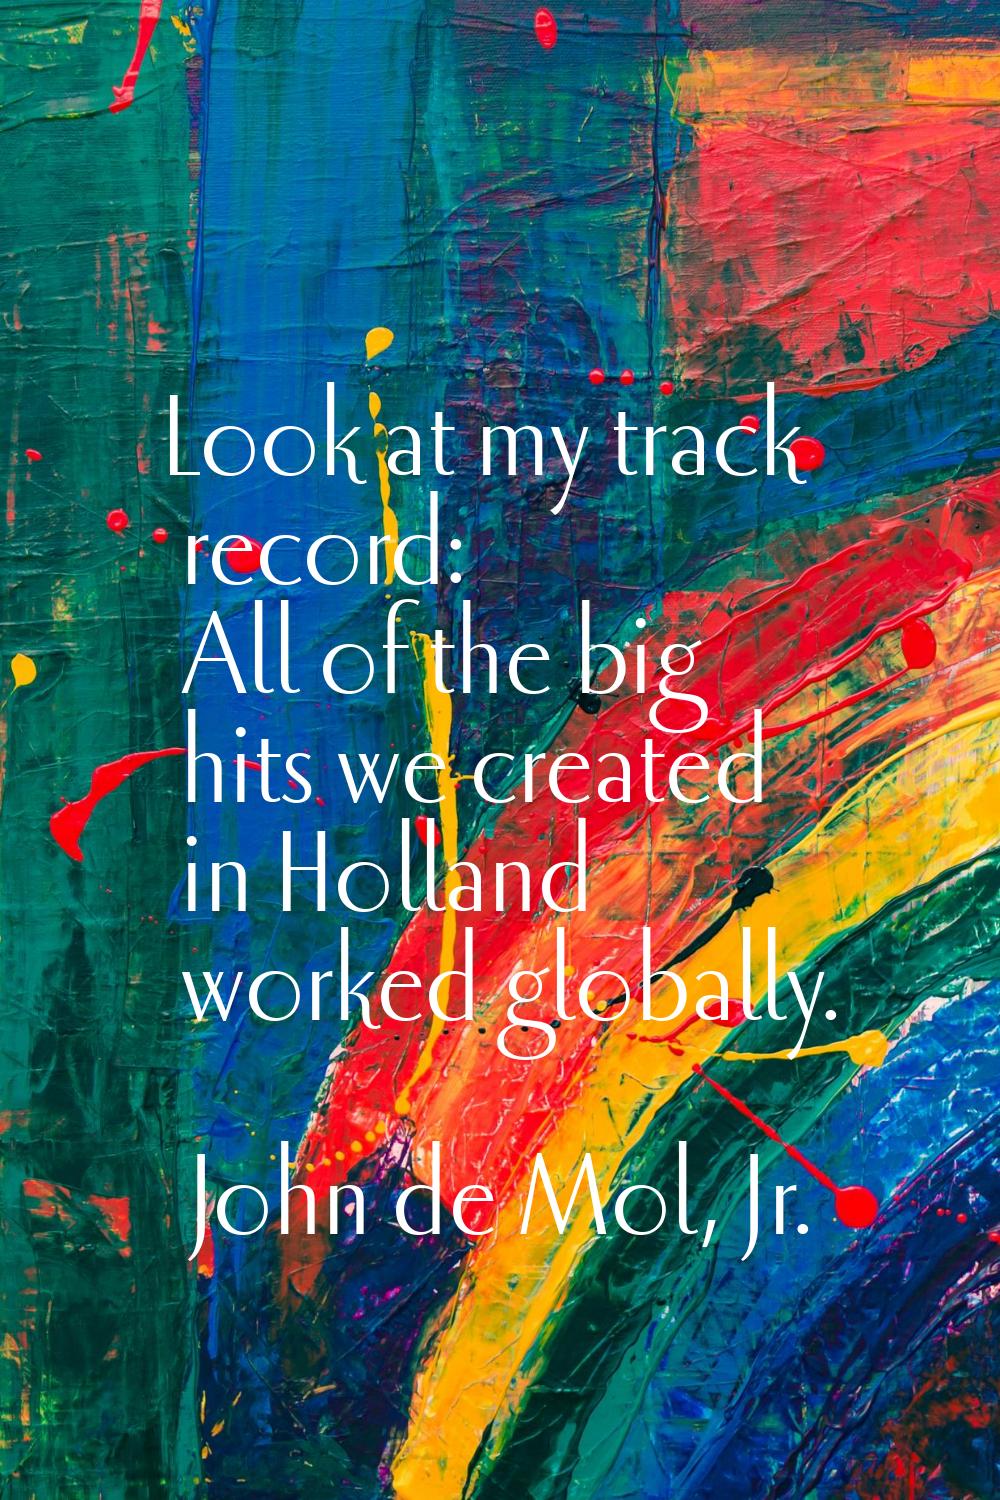 Look at my track record: All of the big hits we created in Holland worked globally.